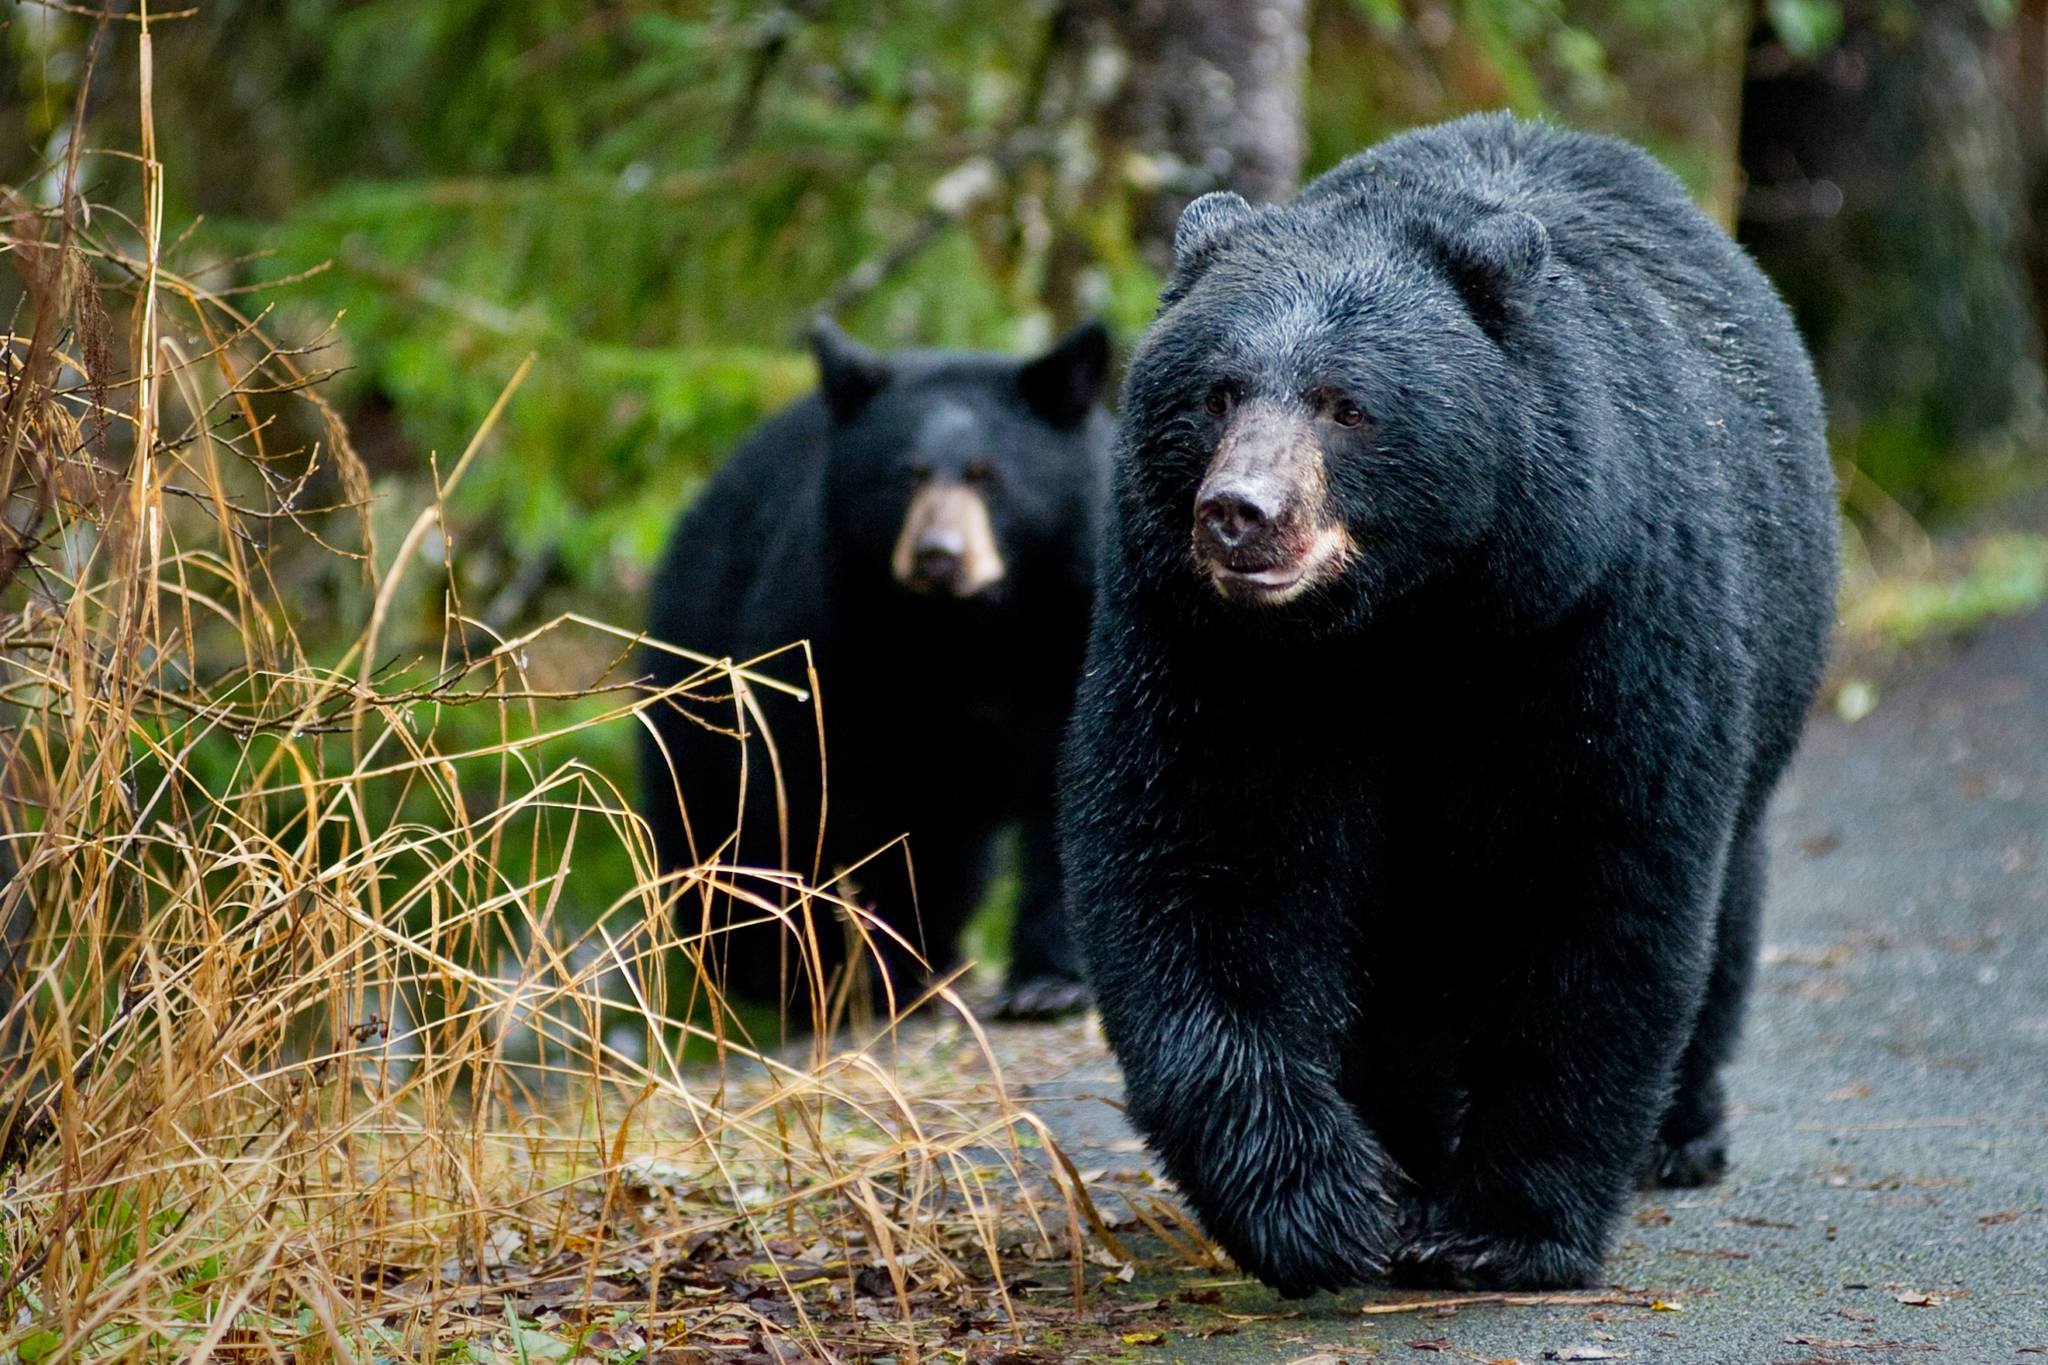 Now’s the time to be aware and prepare for bears